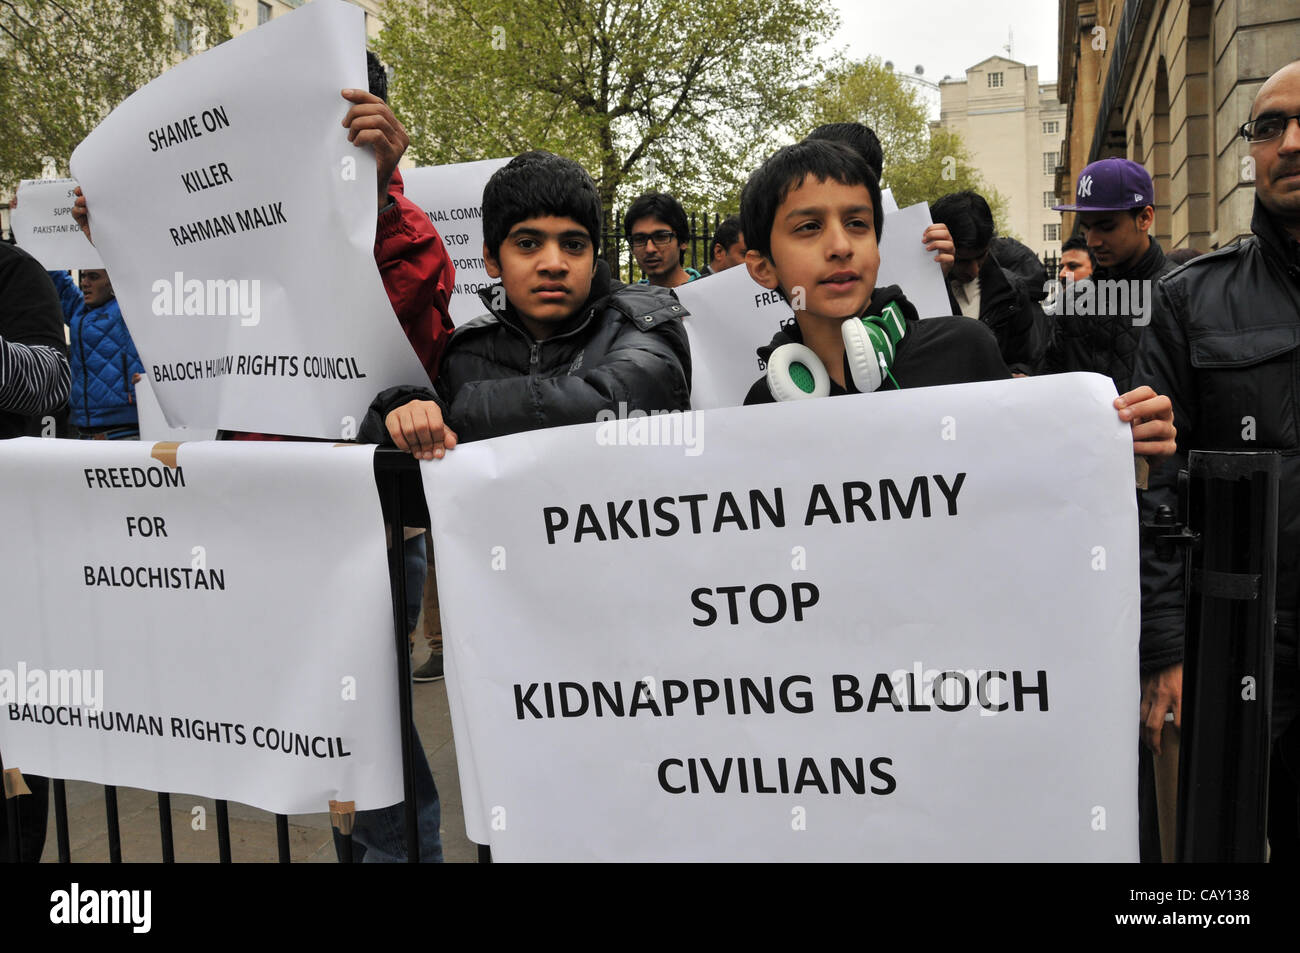 Young boys and men holding banners with slogans 'Freedom for Balochistan' and 'Pakistan army stop kidnapping Baloch civilians' outside Downing Street as part of the protest against forced marriages and conversion in Pakistan. Sunday 6th May 2012. Stock Photo